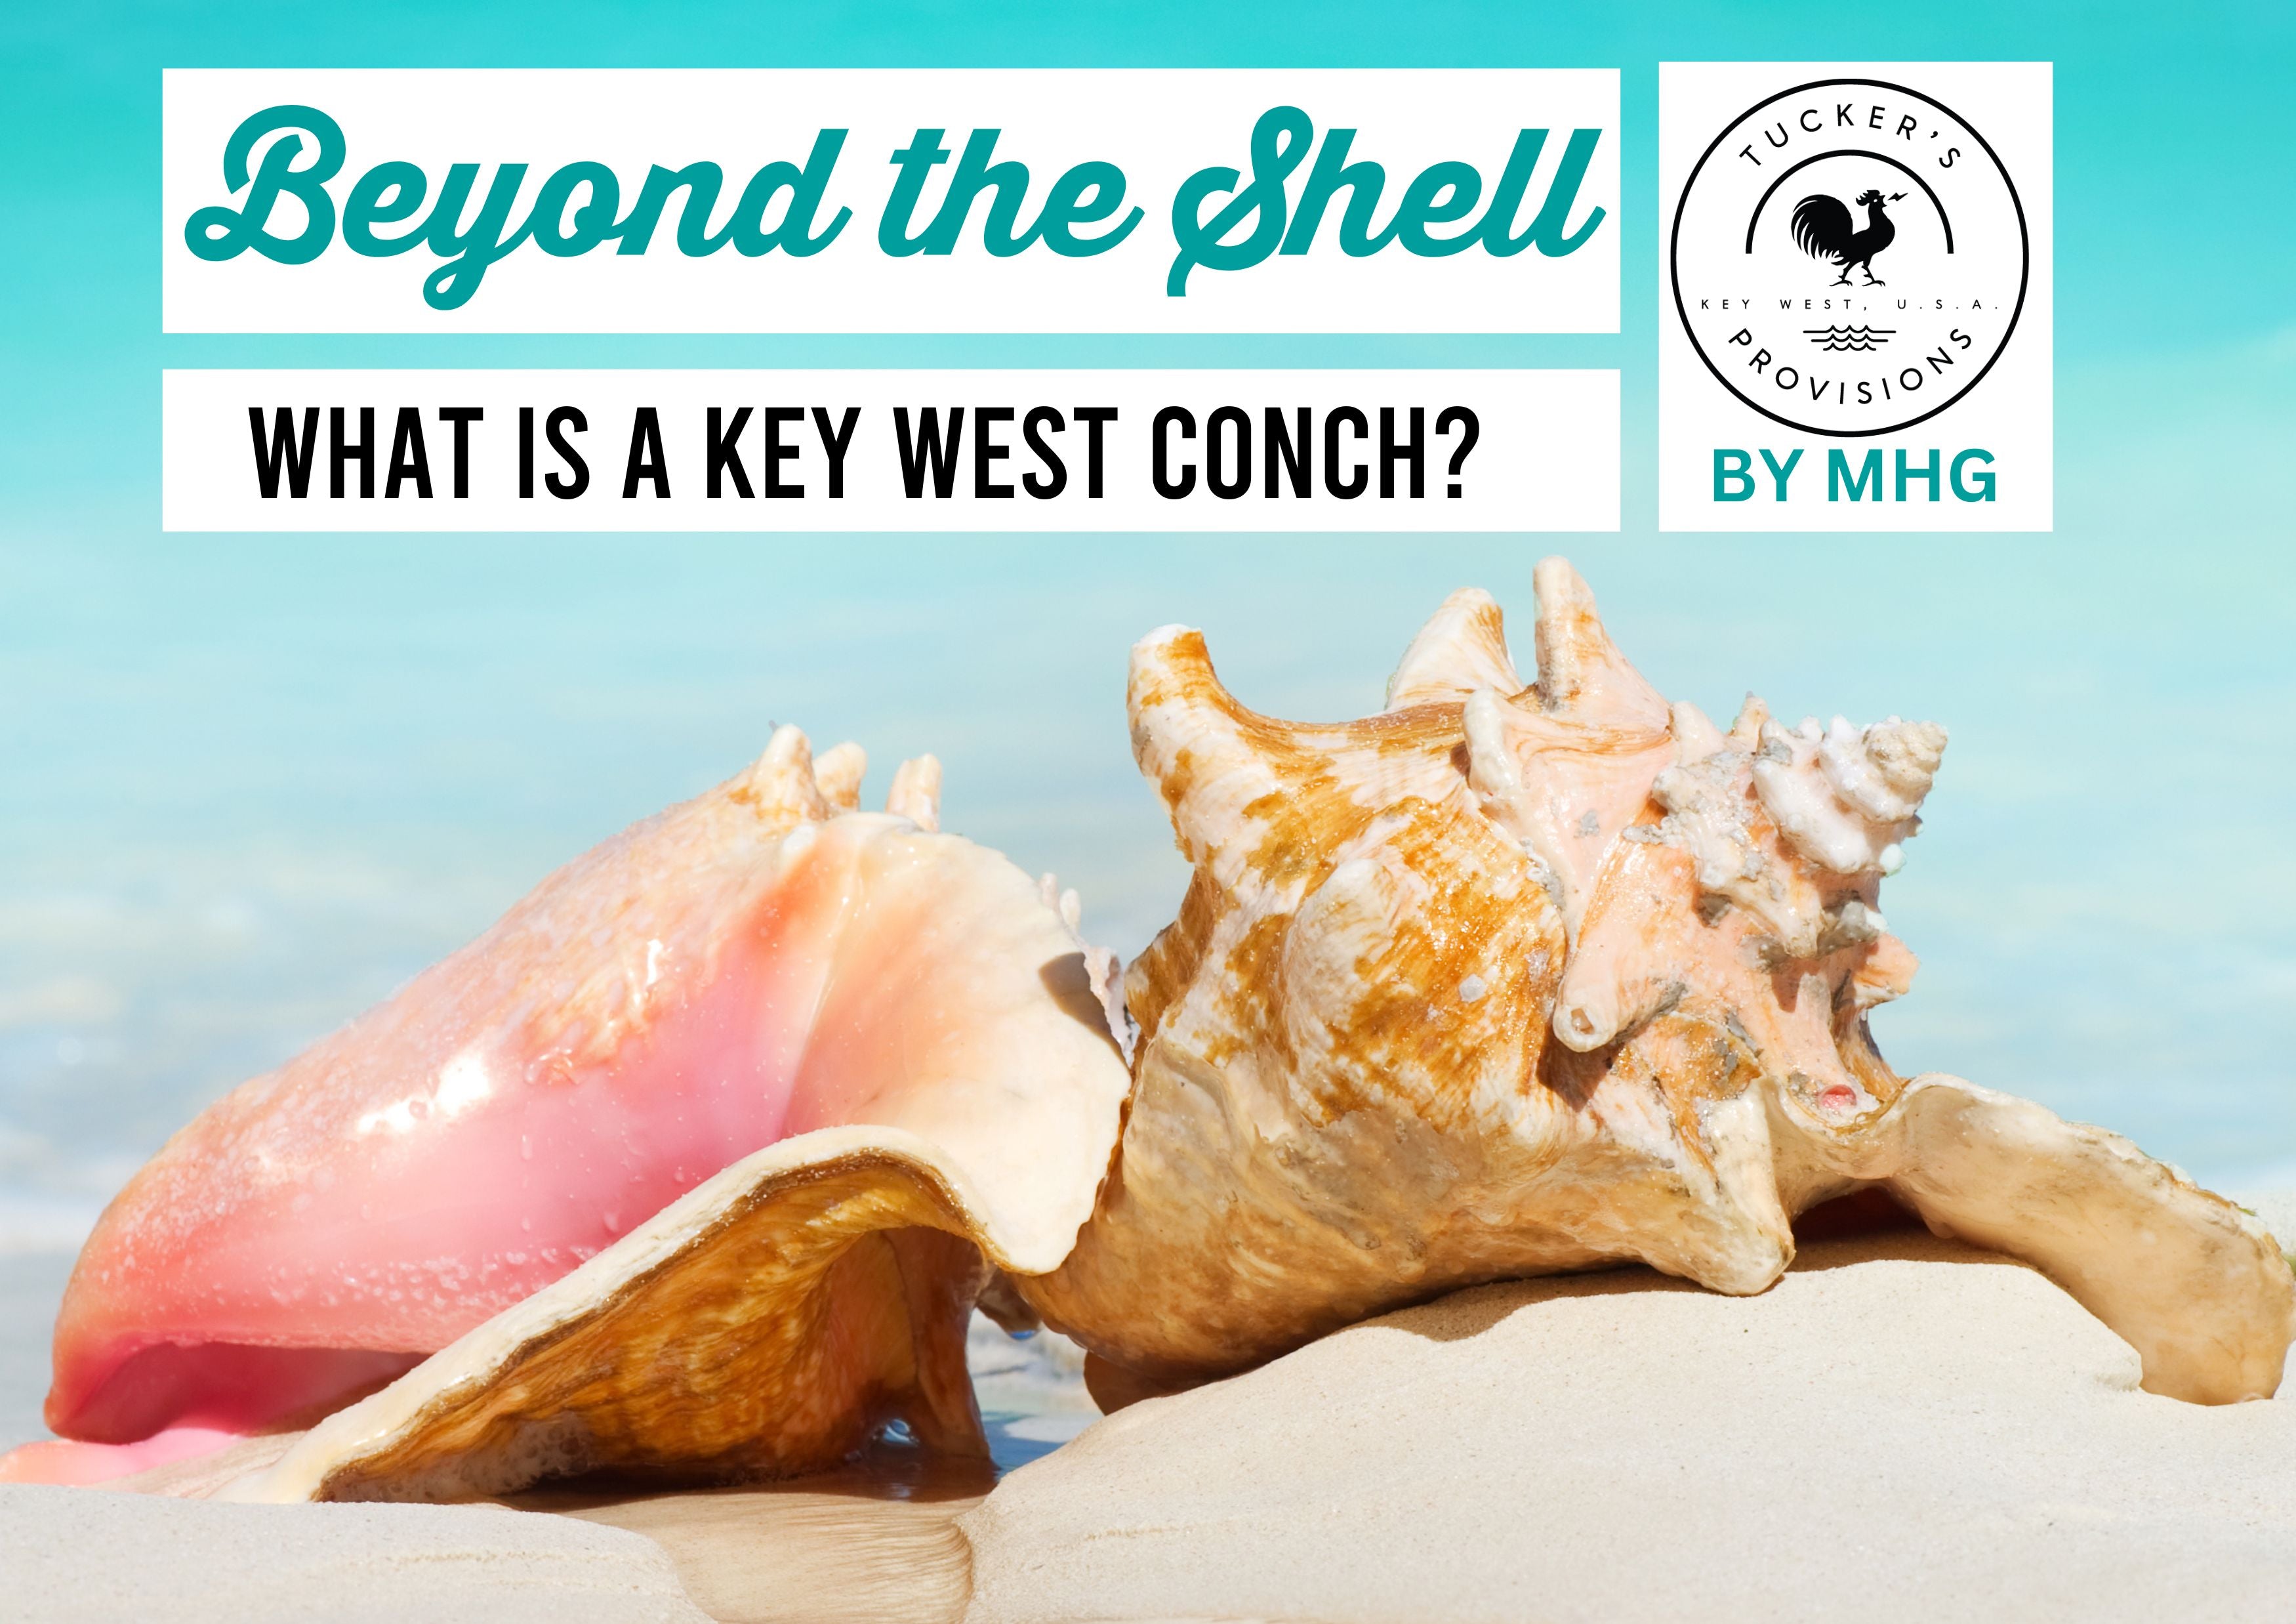 BEYOND THE SHELL - What is a Key West Conch?